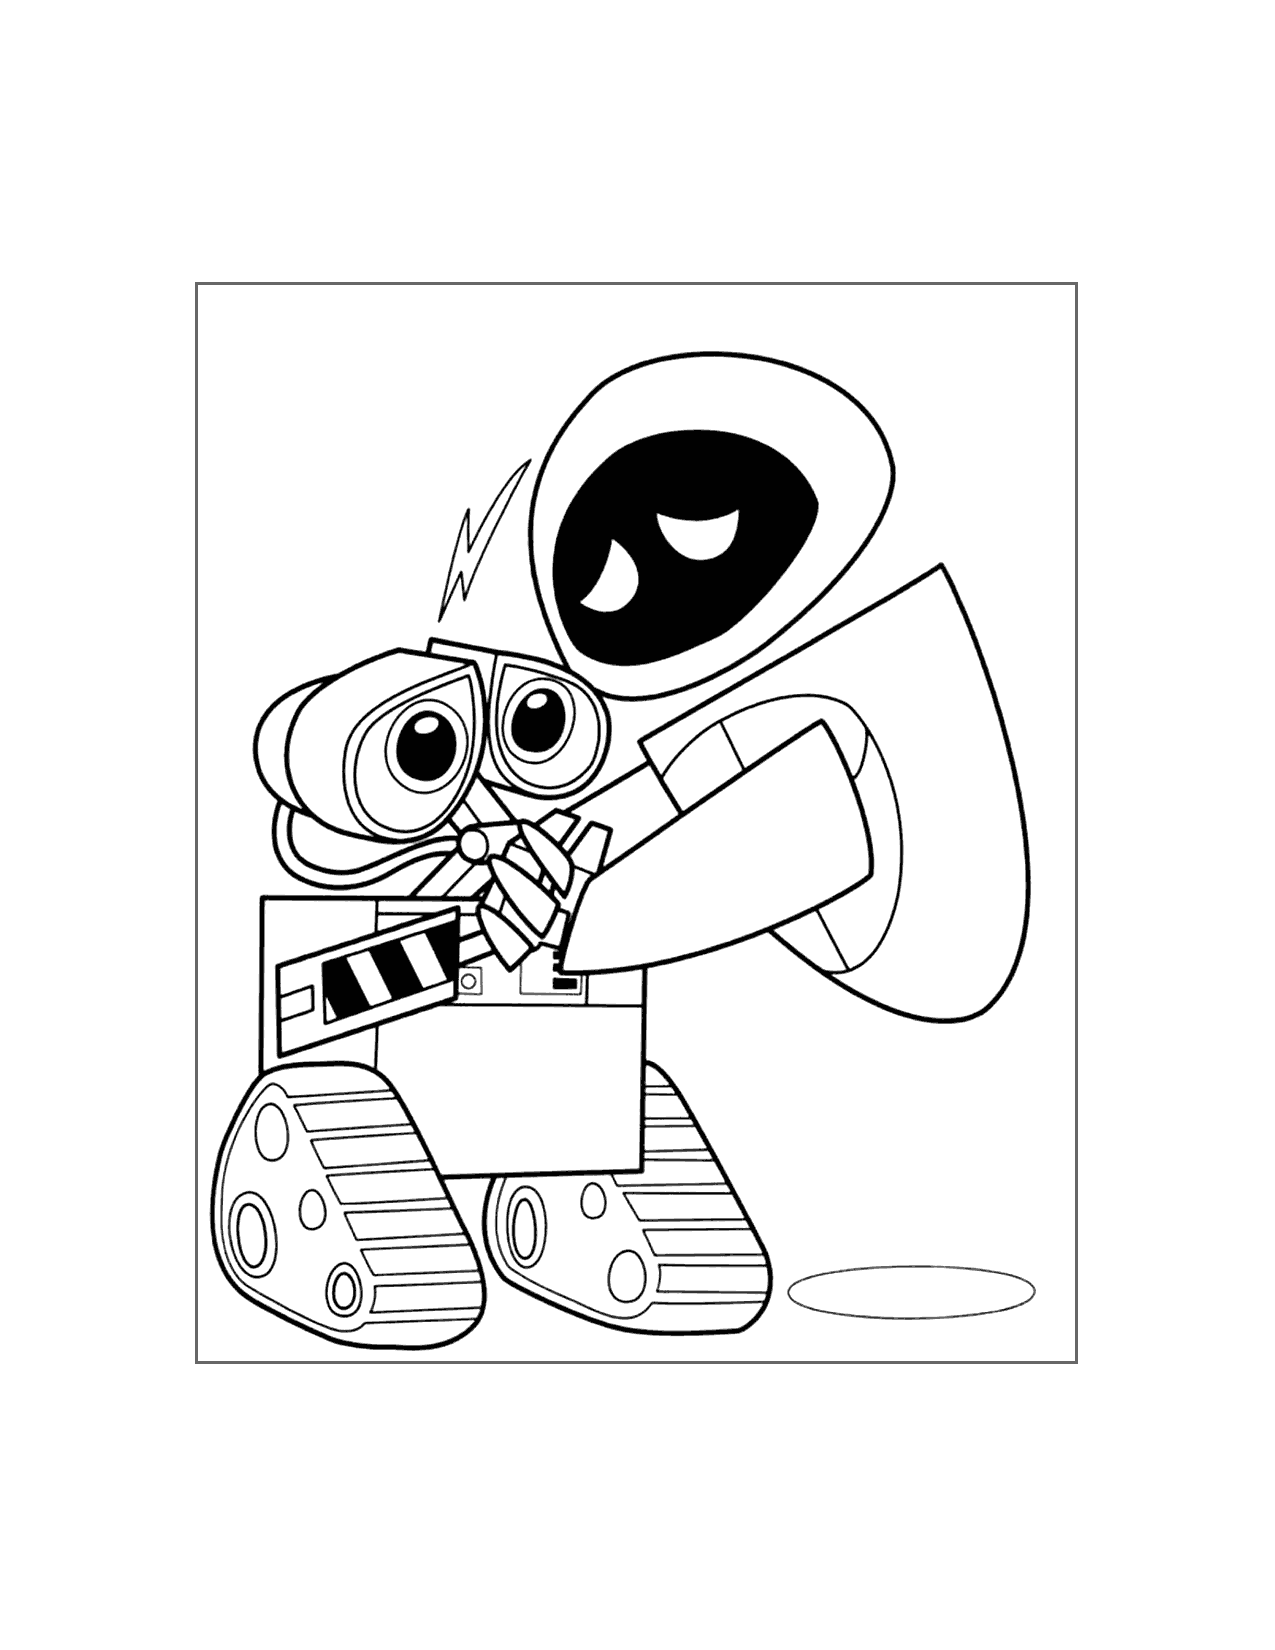 Eve Brings Wall E Back To Life Coloring Page